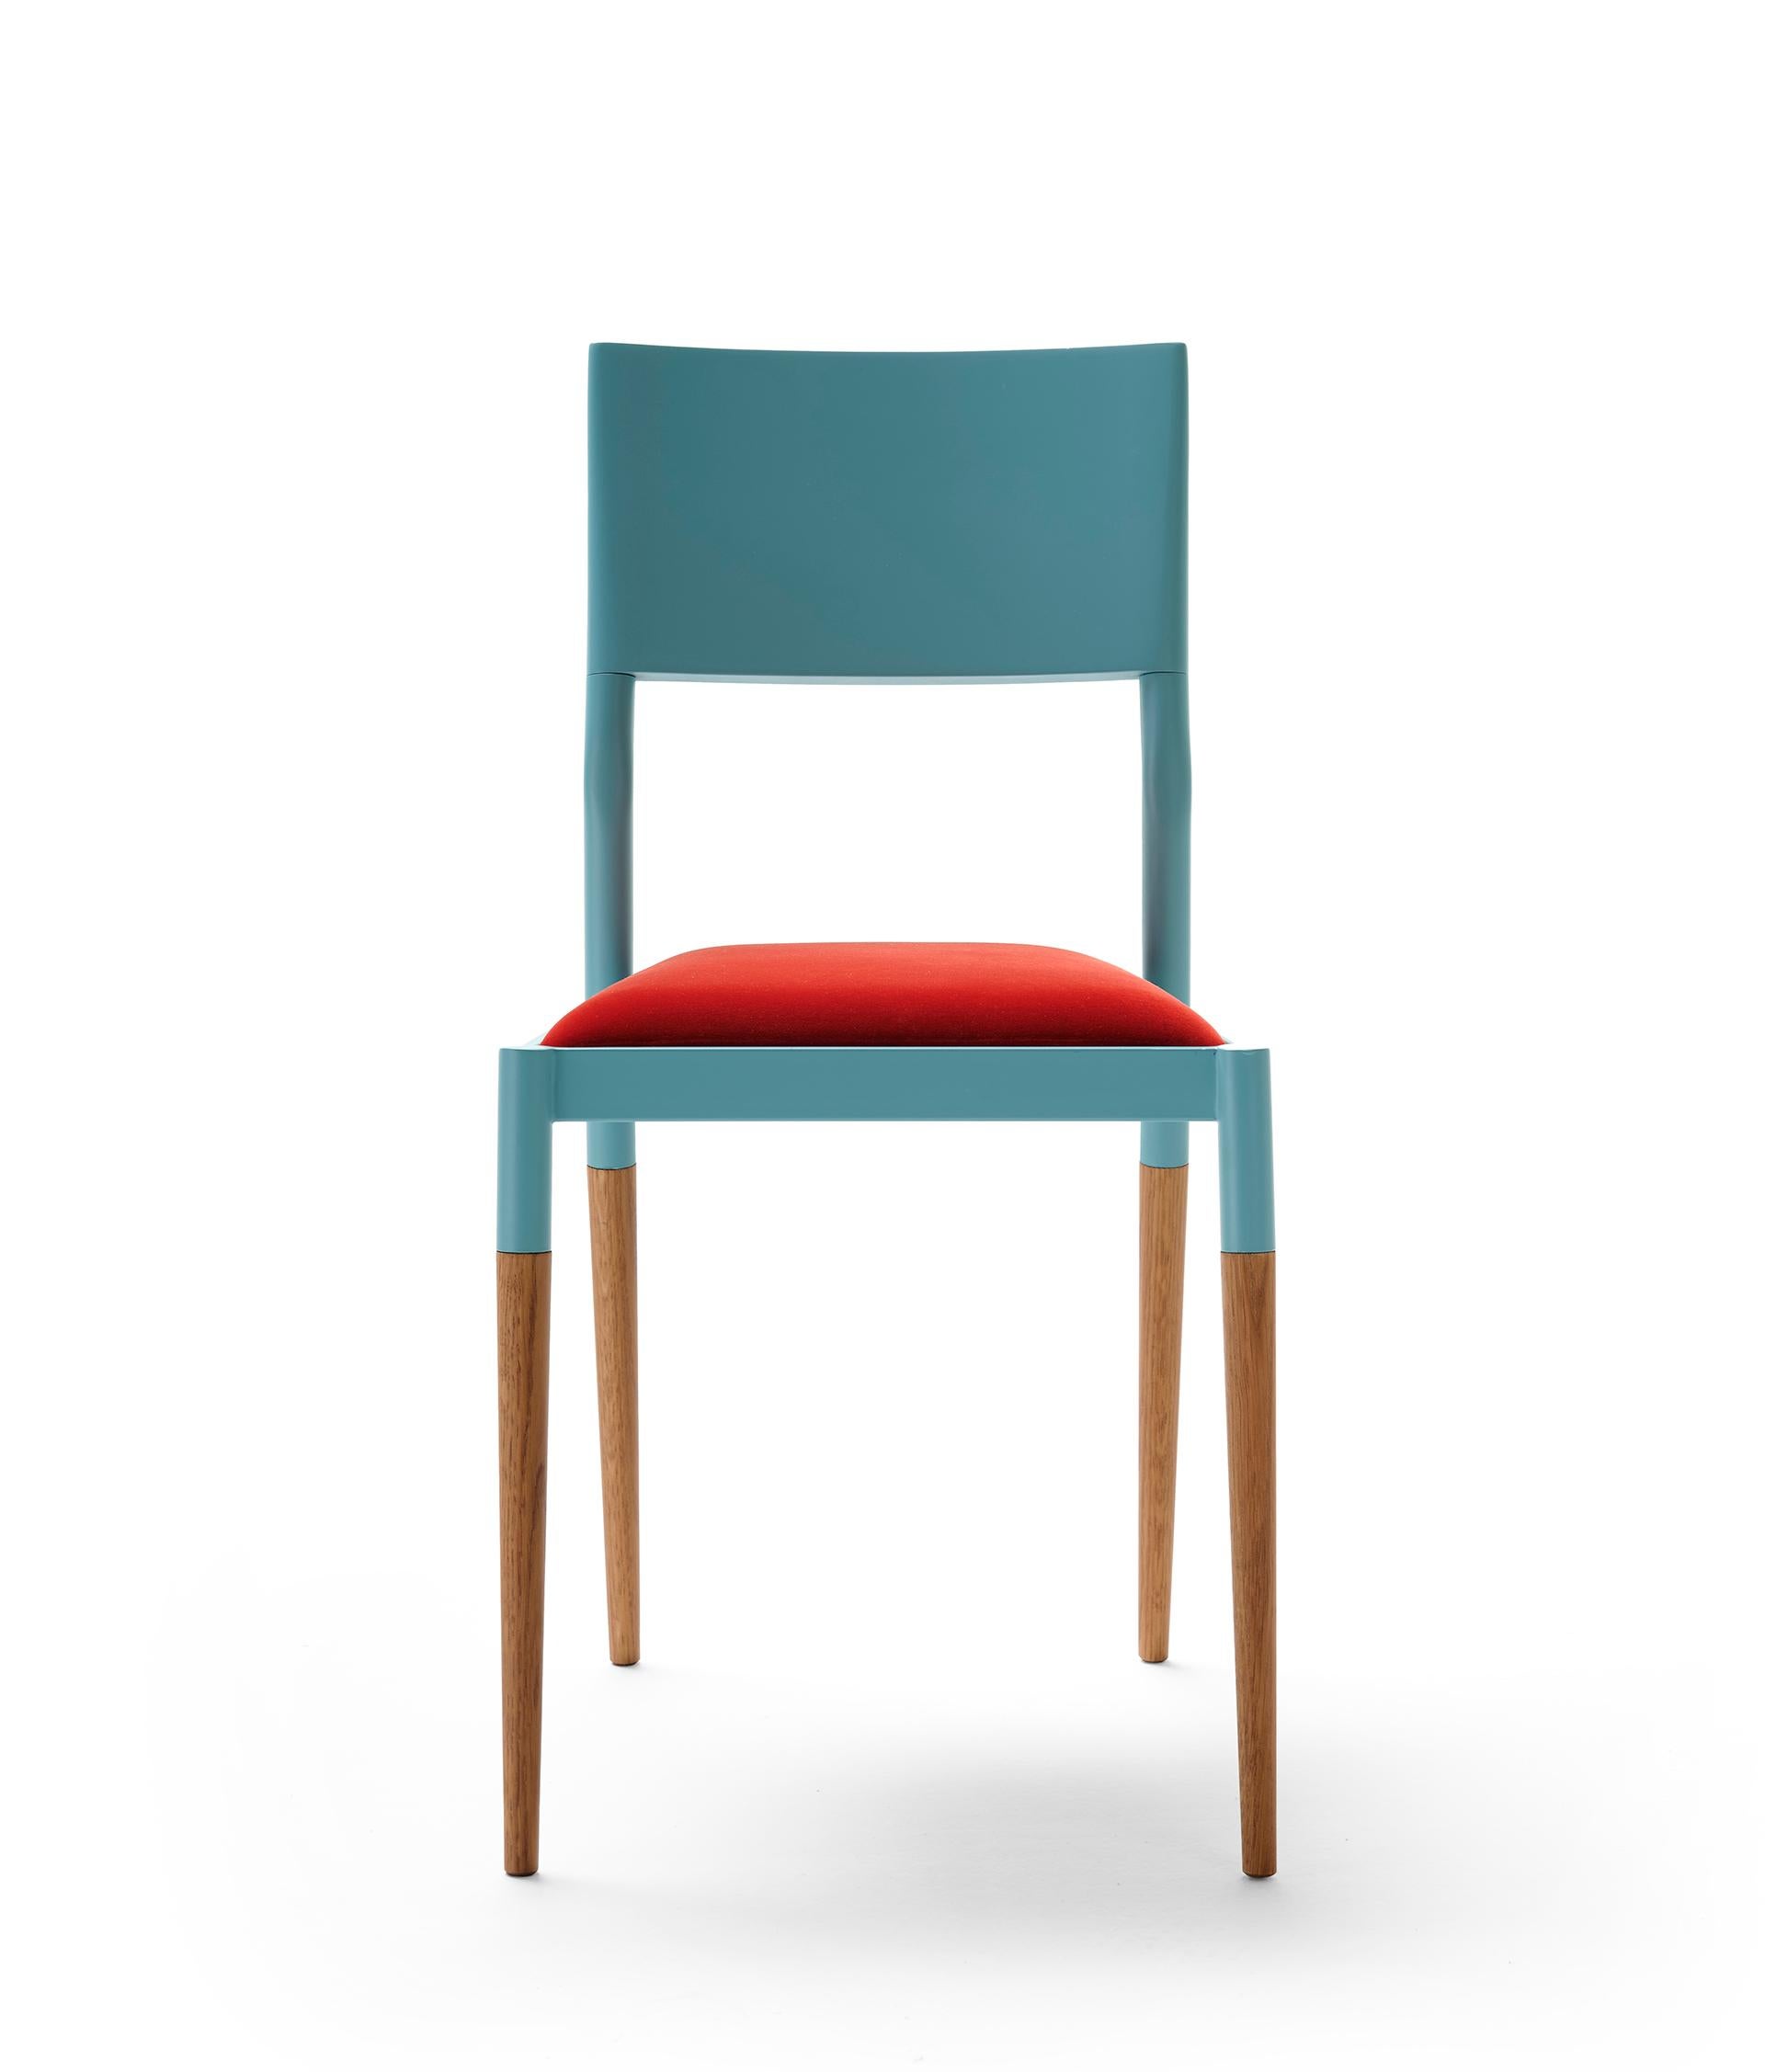 Bic chair is made by a single metal assembly that supports the upholstered seat and holds the legs and the backrest. The use of different materials in the parts of the chair allows us to take full advantage of their structural properties and their